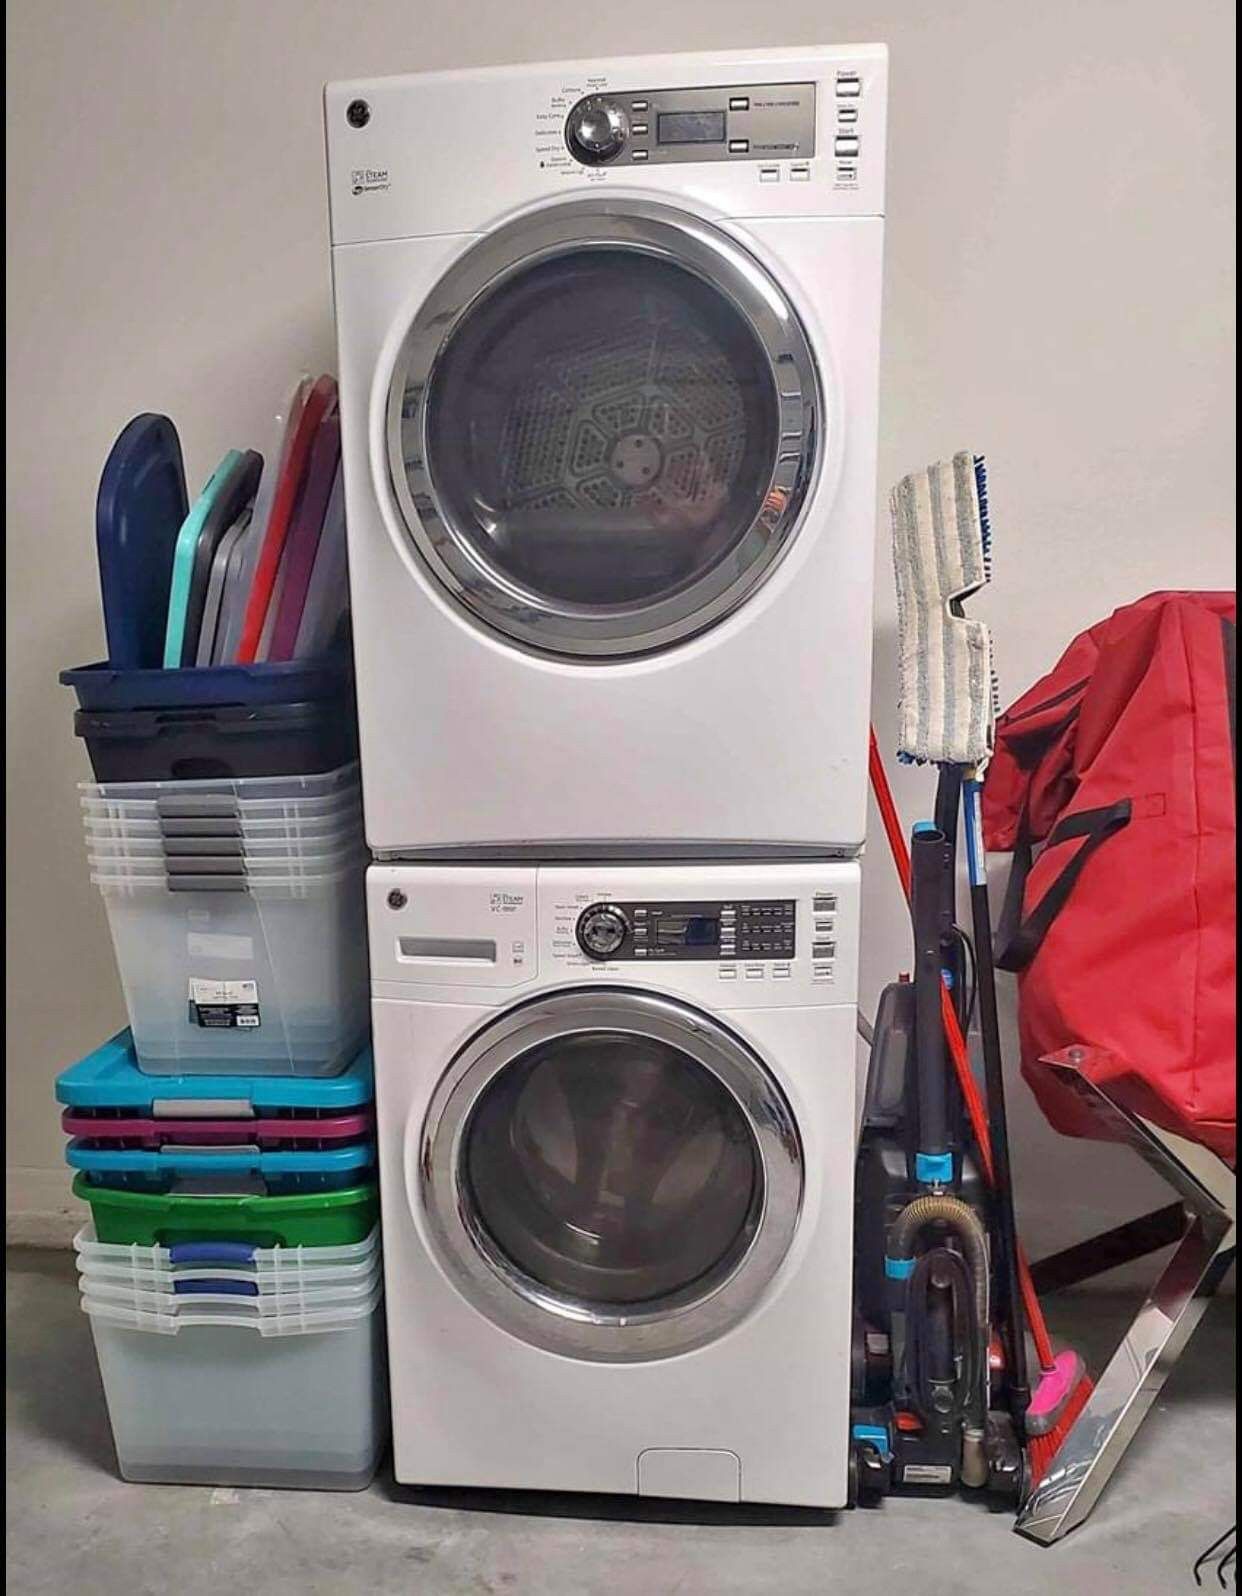 Are you looking for front load washer and dryer ? The set will be great for you